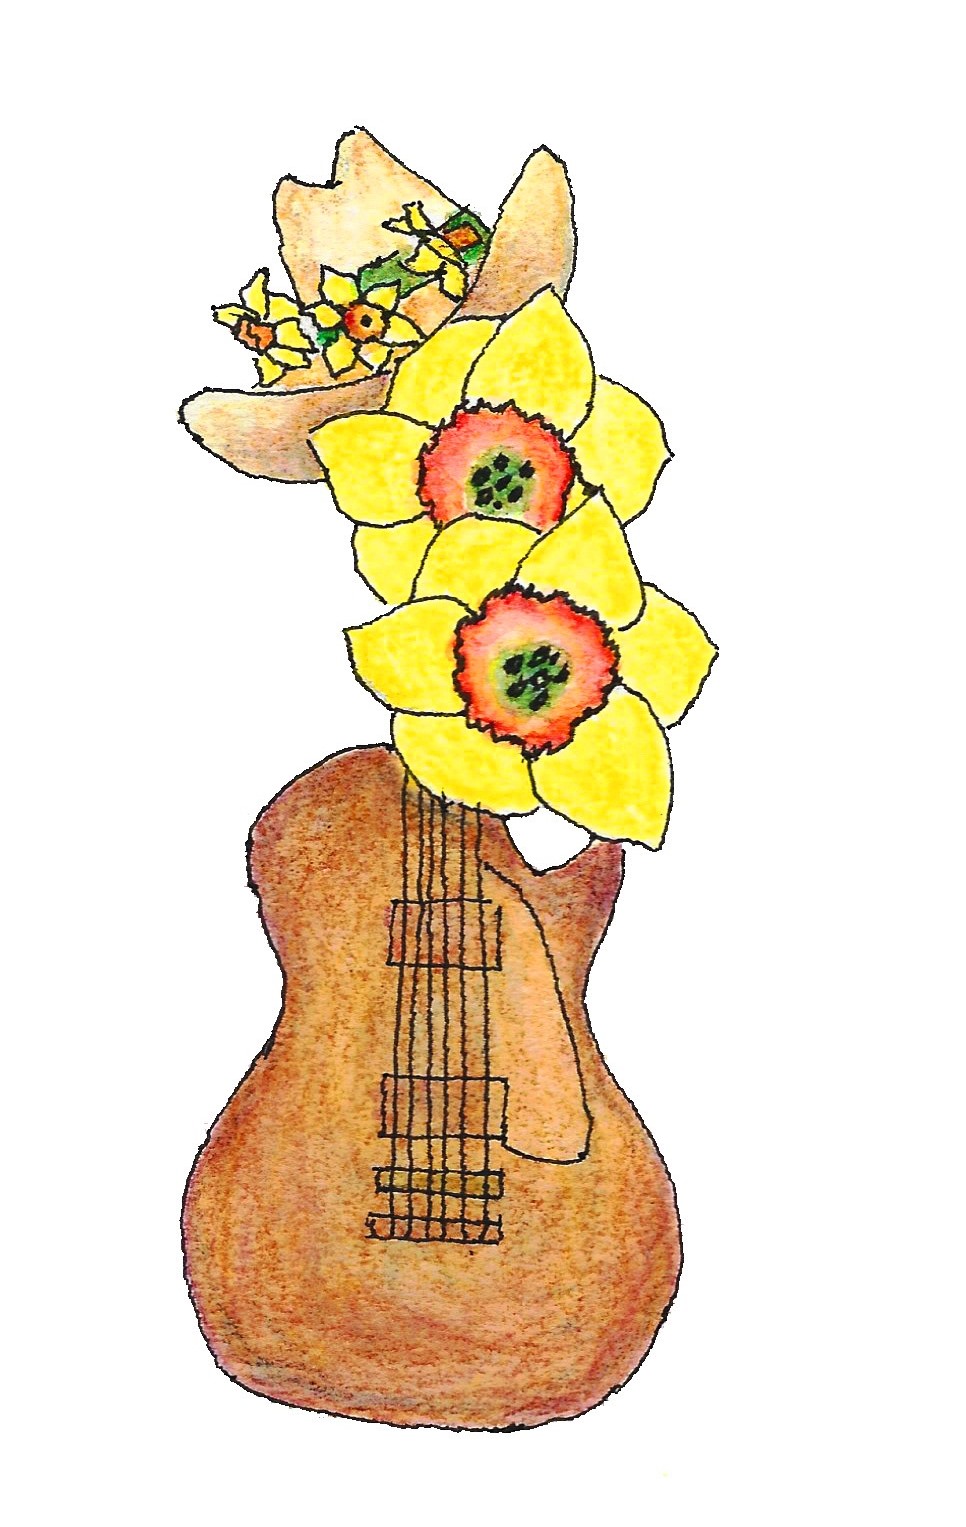 ADS 2018 logo of guitar with daffodils